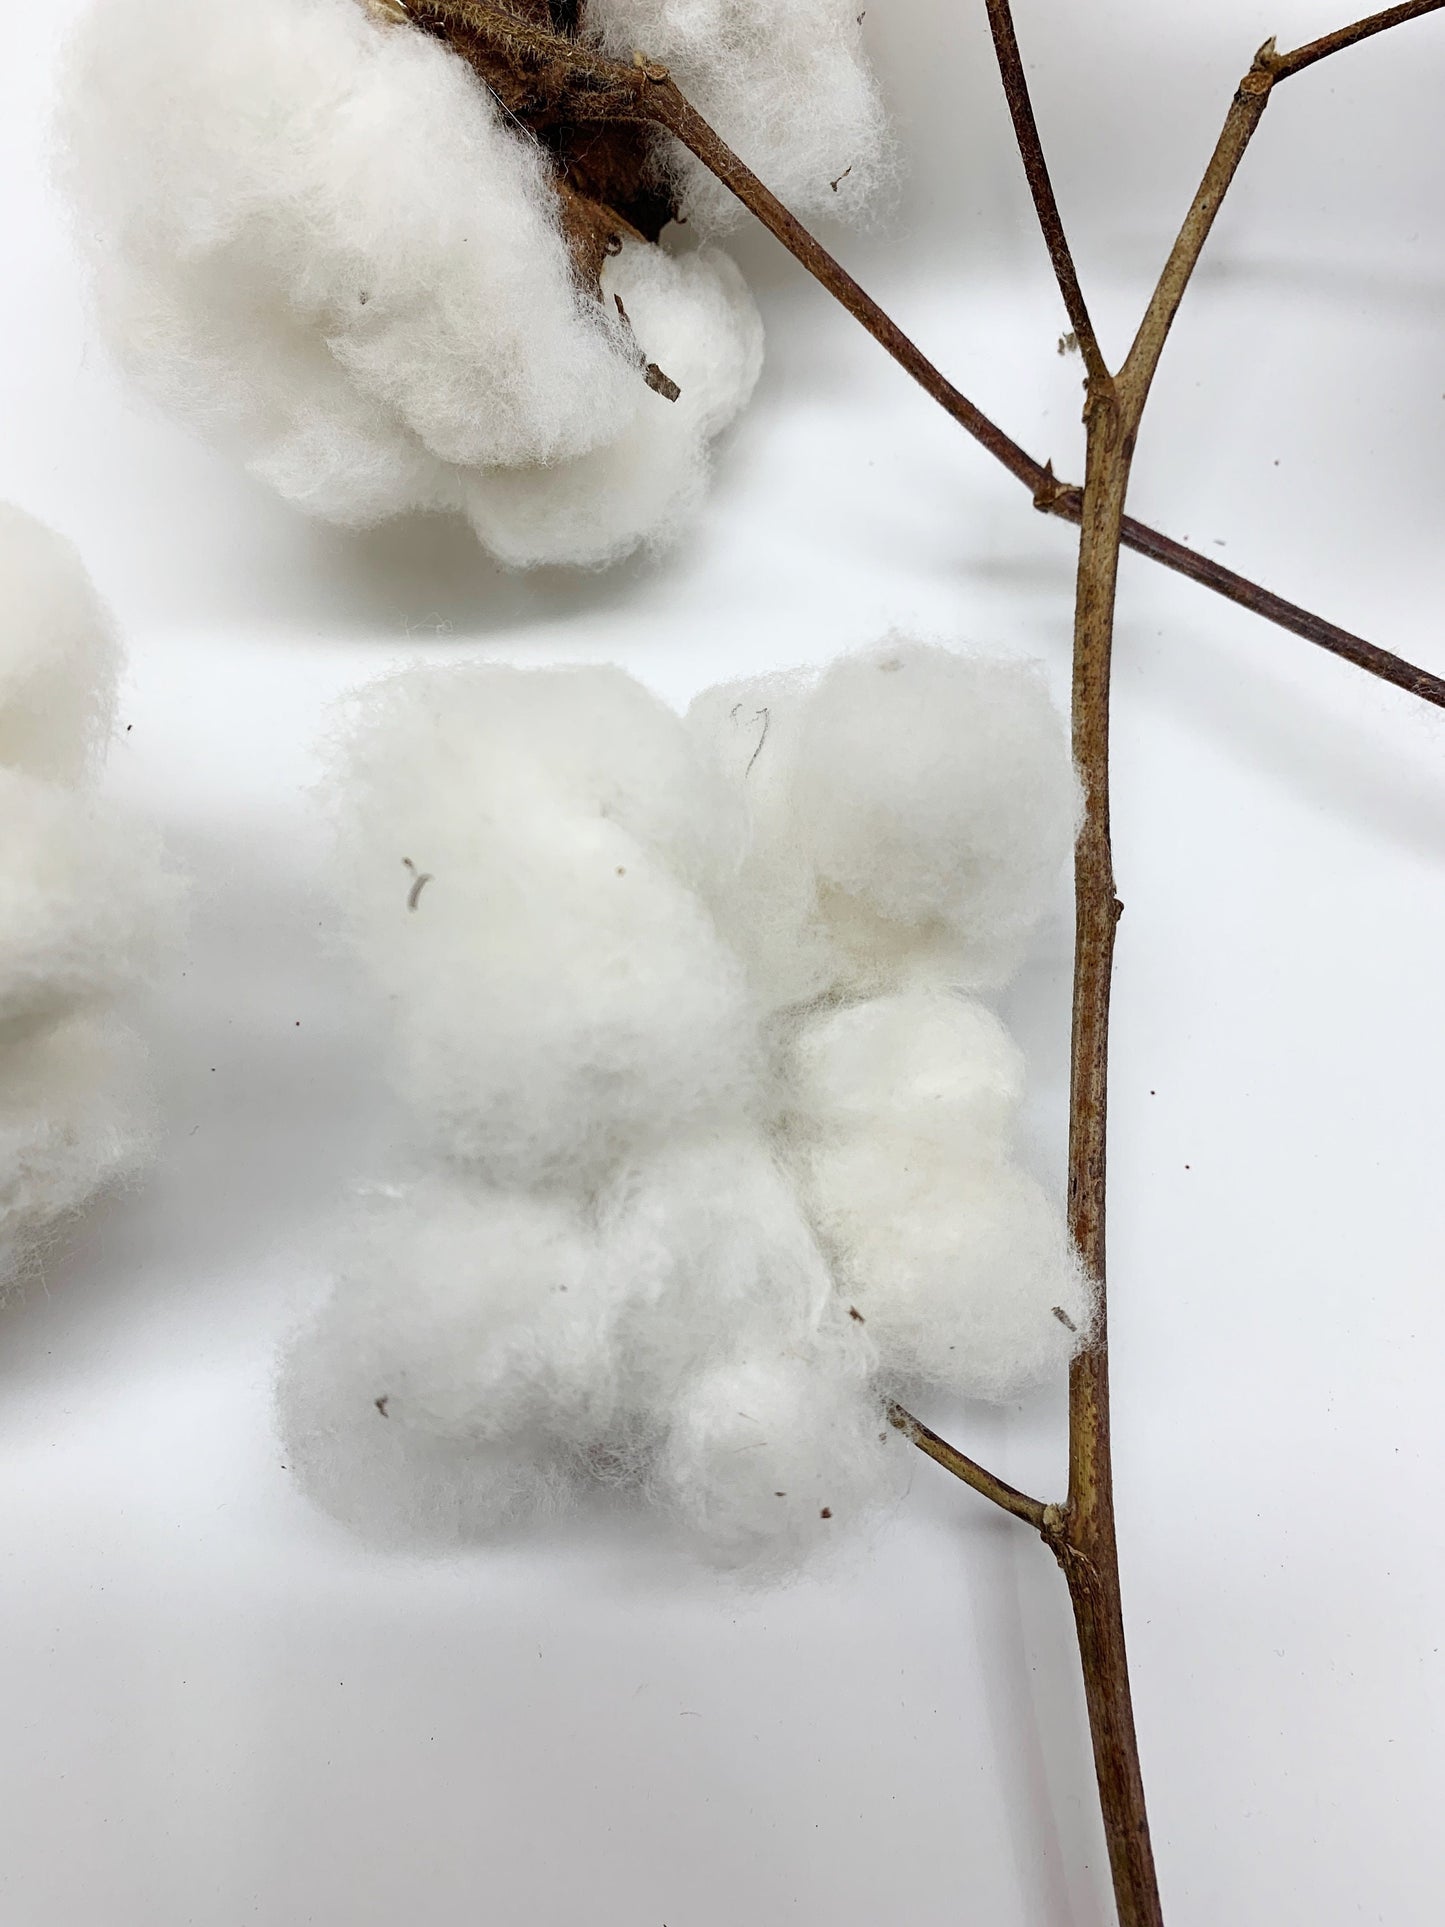 Real Cotton Stems, Natural Cotton, Heads, White, House Decoration, Wedding, REAL, Branches, Cotton Seeds, Cotton Branches, Cotton Stems